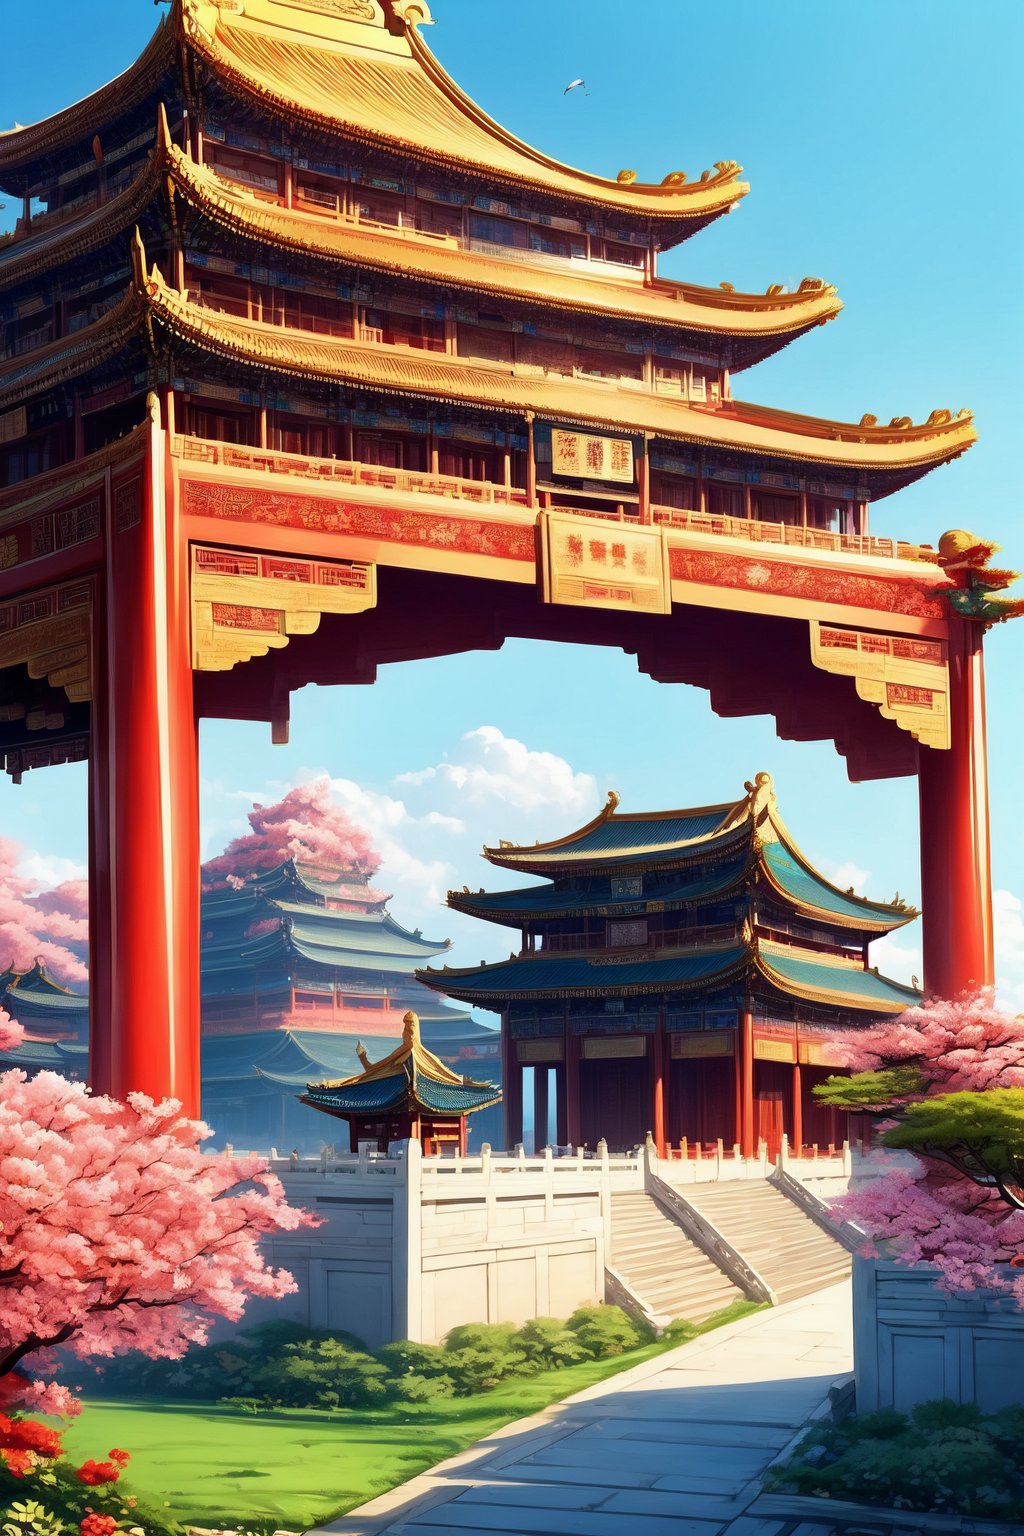 majestic, high-definition, vibrant, picturesque, 
giant Chinese imperial palace, traditional architecture, golden and red tones, 
beautiful scenery, bird songs, fragrant flowers, cloudless sky, 
cultural, historical, serene, visually striking, 